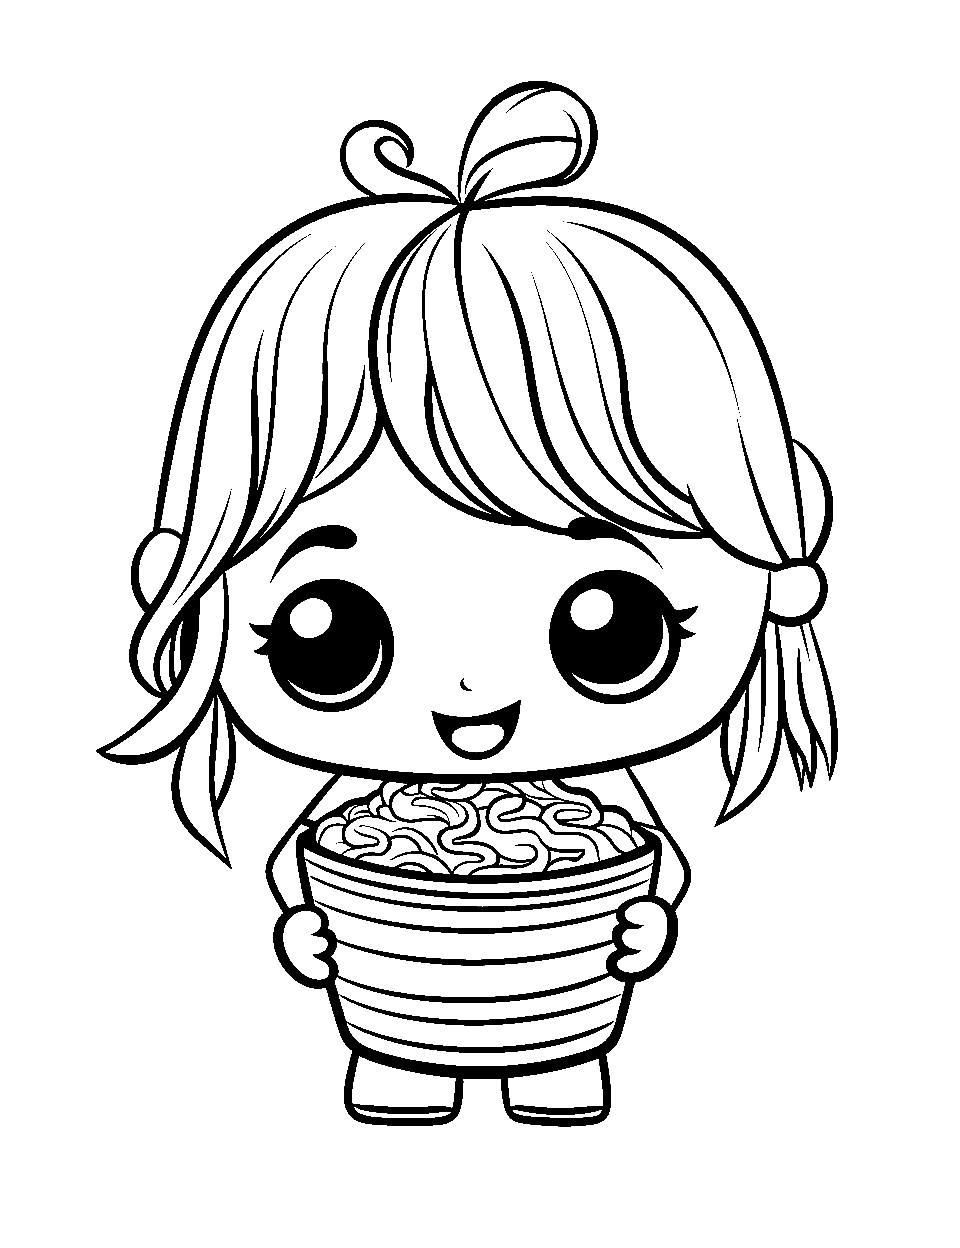 Chibi Noodle Bowl Food Coloring Page - A chibi character with a big noodles bowl ready to eat it all up.